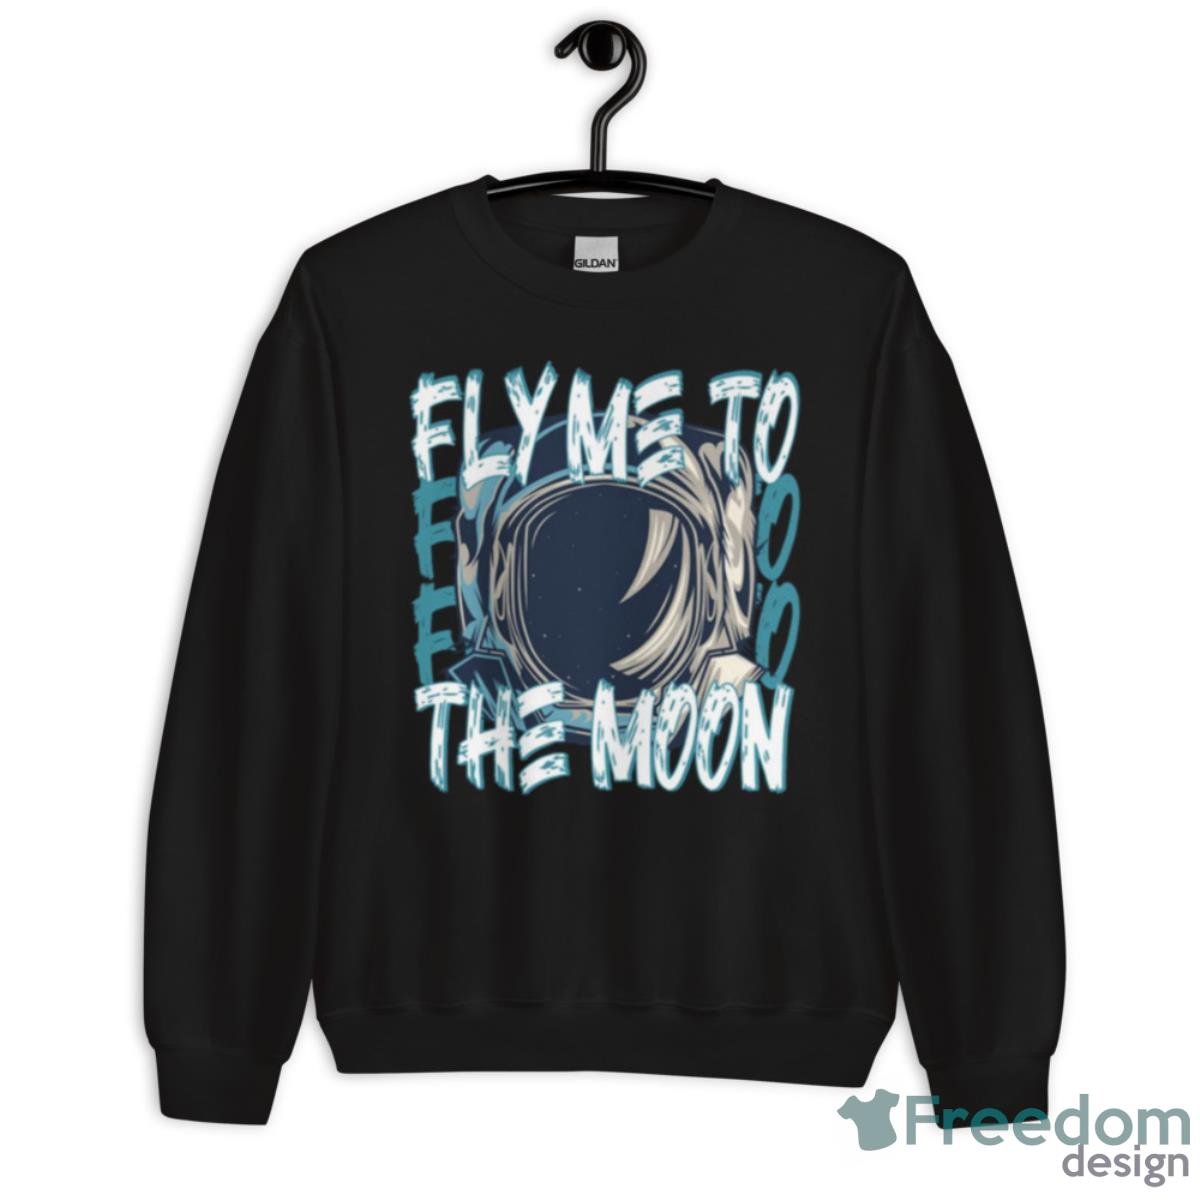 Retro Illustration Fly Me To The Moon Shirt